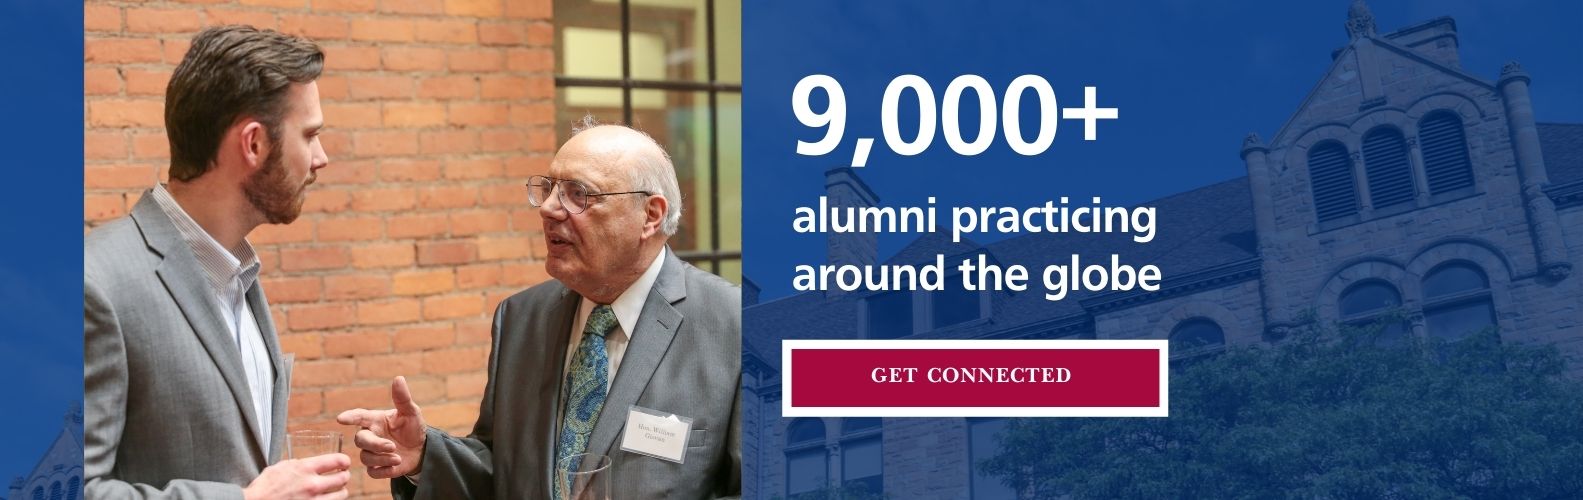 Get Connected with Alumni from around the world